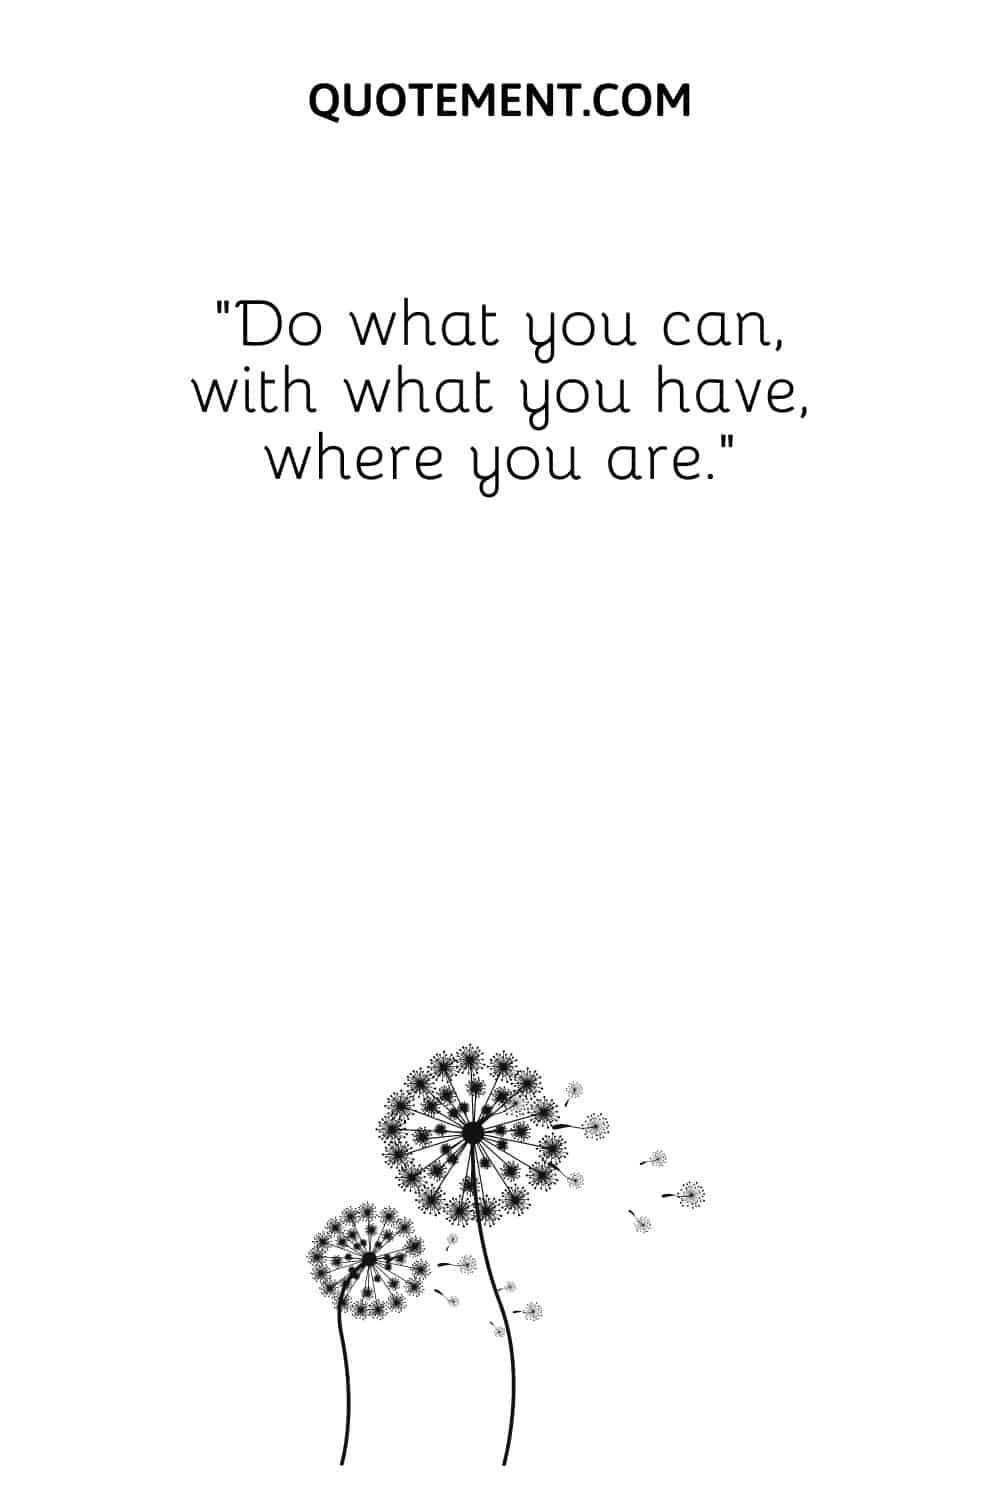 Do what you can, with what you have, where you are